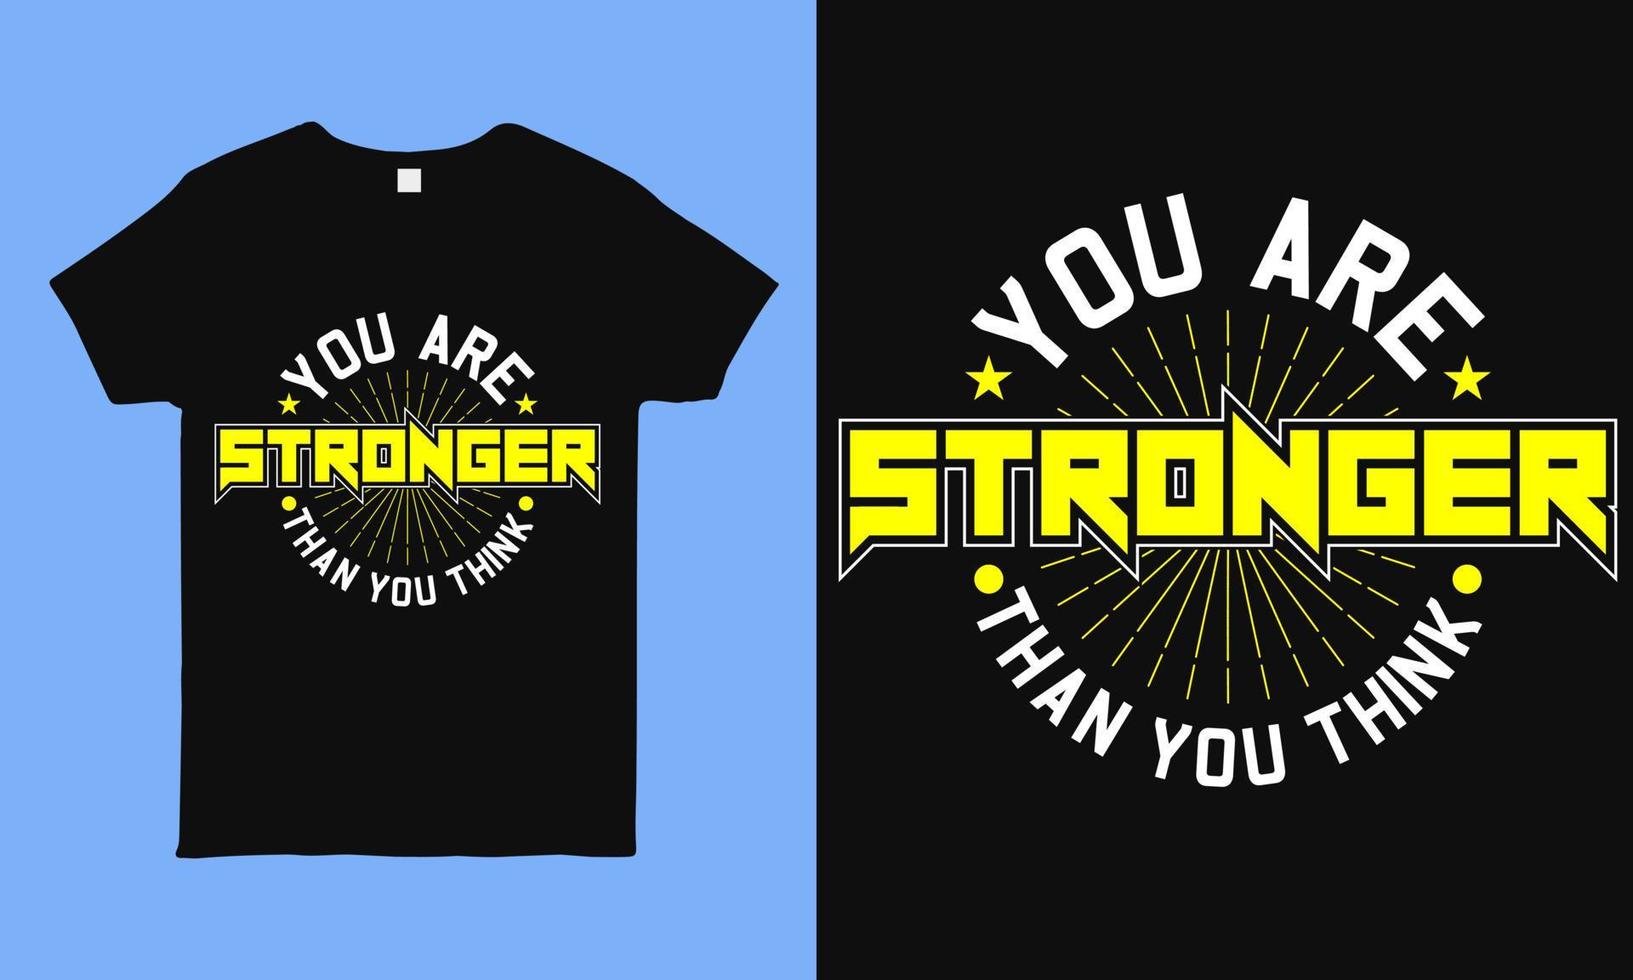 You are Stronger than you think. Motivational t Shirts With Positive and Inspirational Quote. Best for t shirt, mug print. Circular vintage shirt design for man, woman and children vector